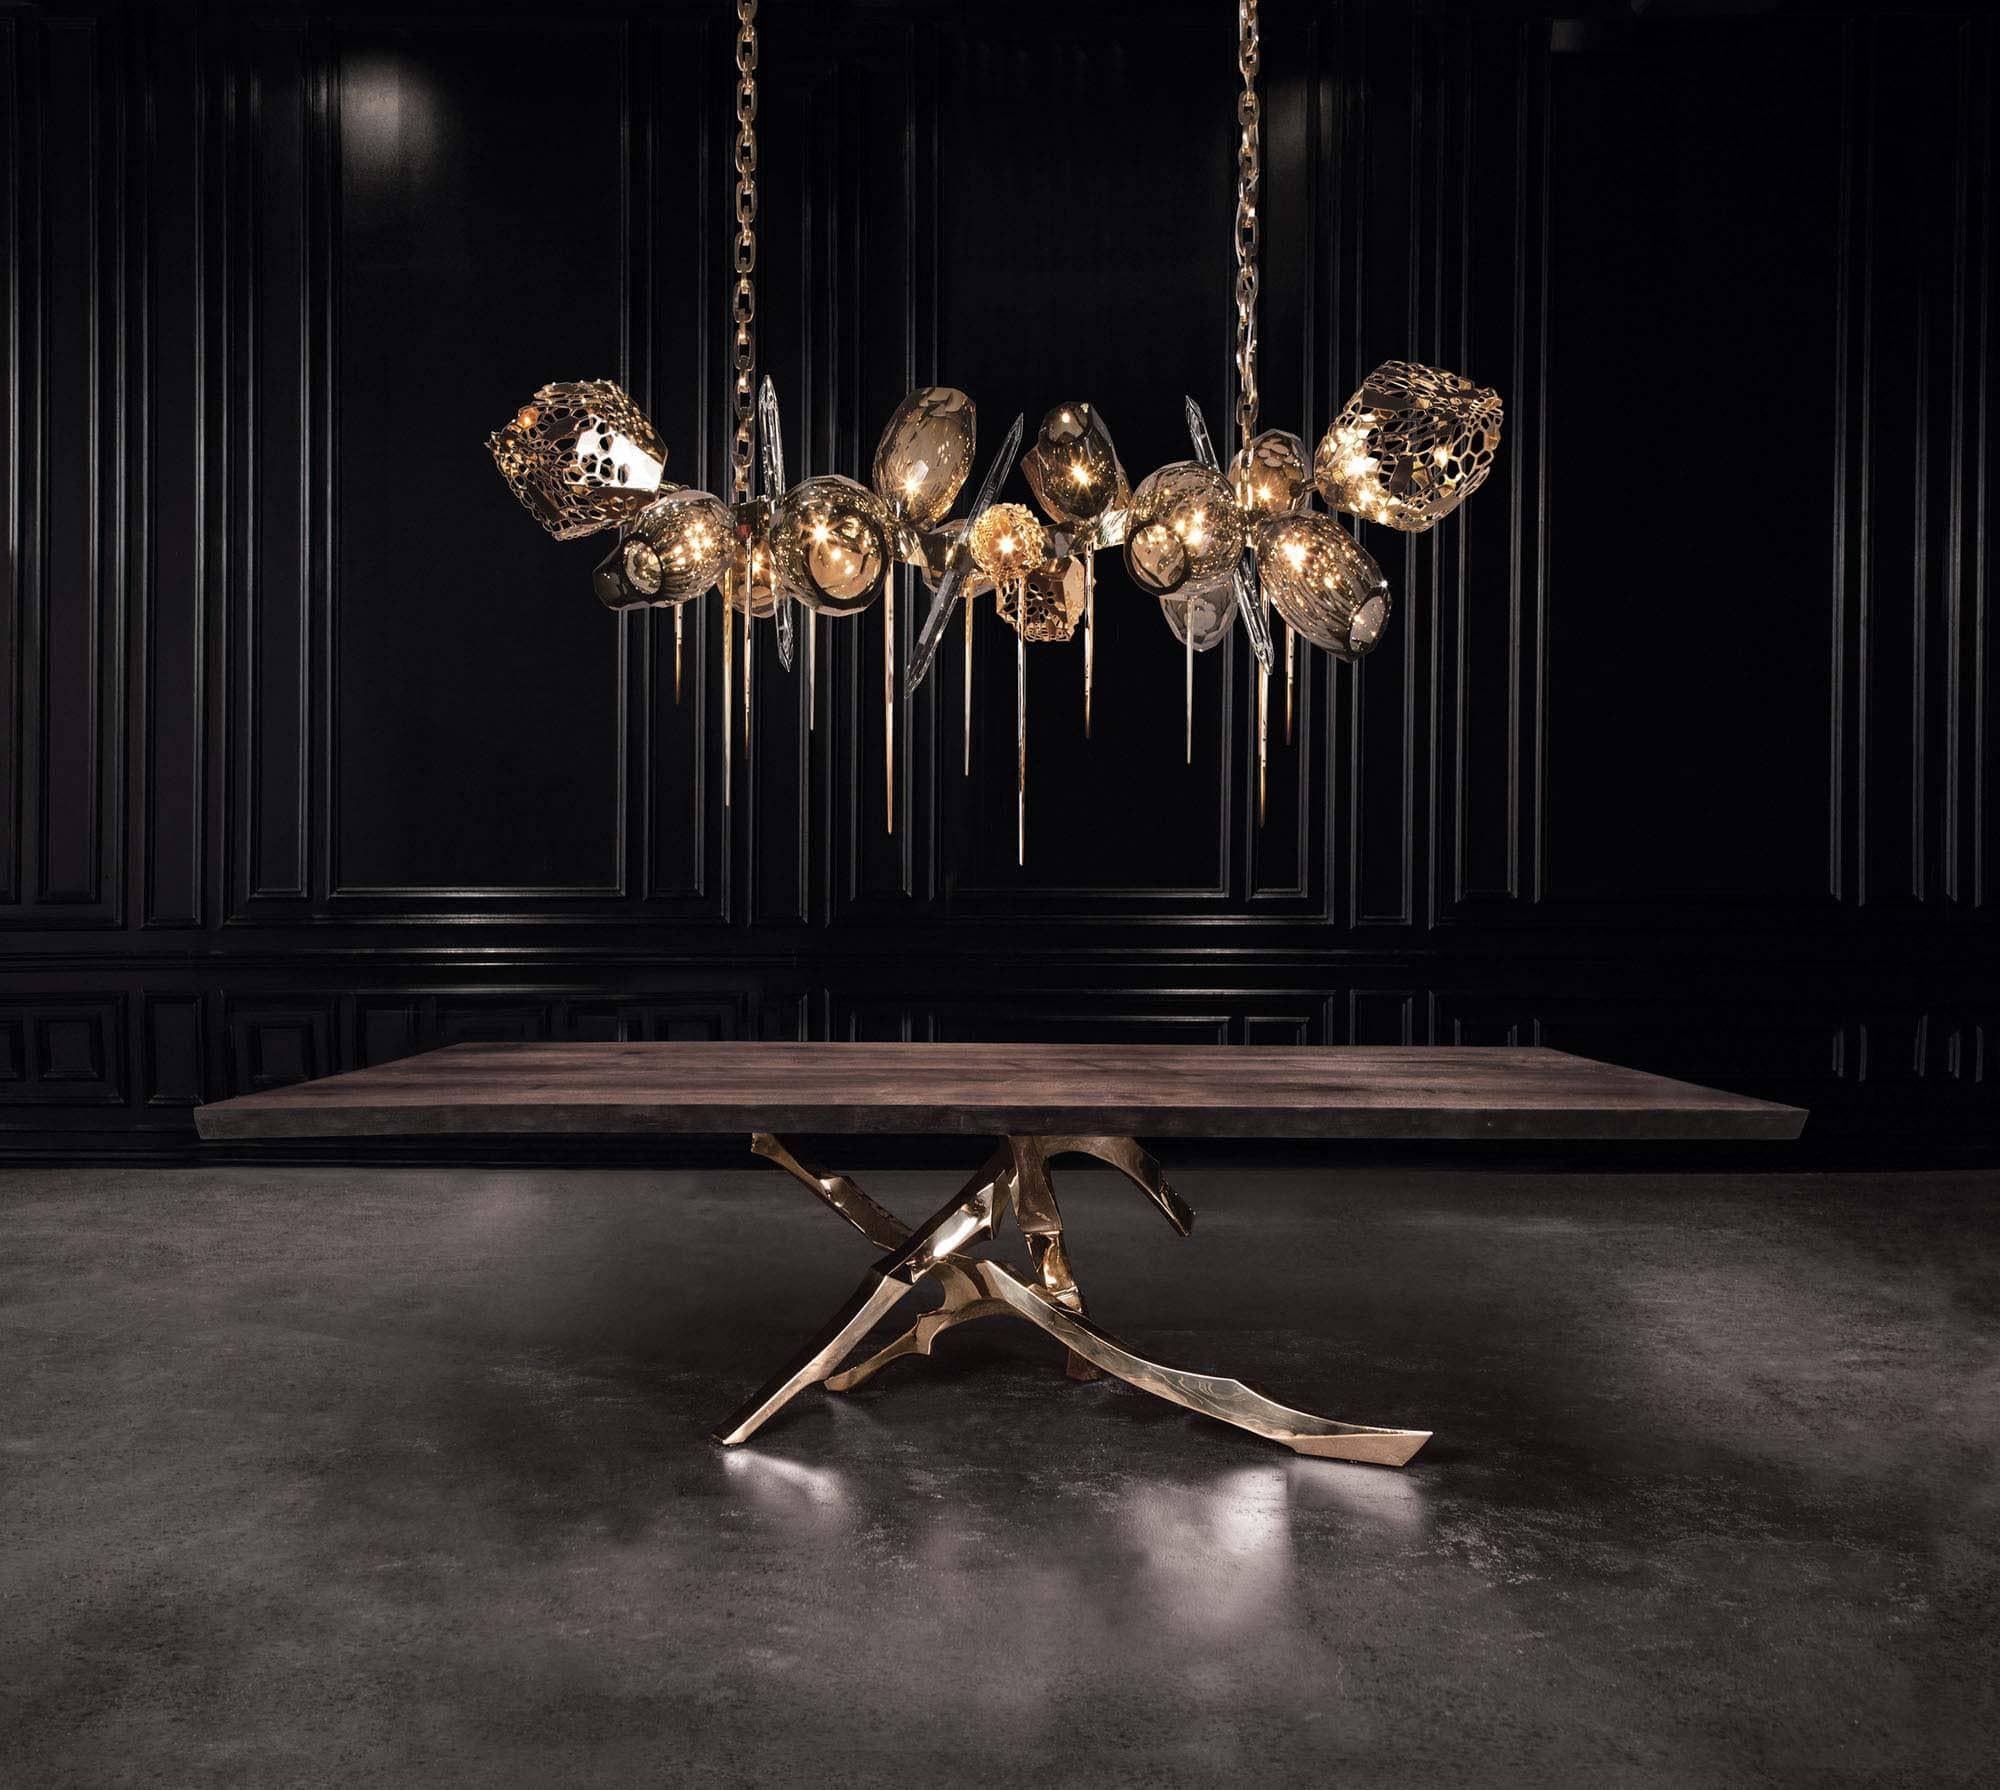 Transferring traditional Murano glassware design and craftsmanship into a contemporary work of art, the Britannica Chandelier by Barlas Baylar is born from an artistic interpretation of lighting for a modern approach to illumination. The Britannica